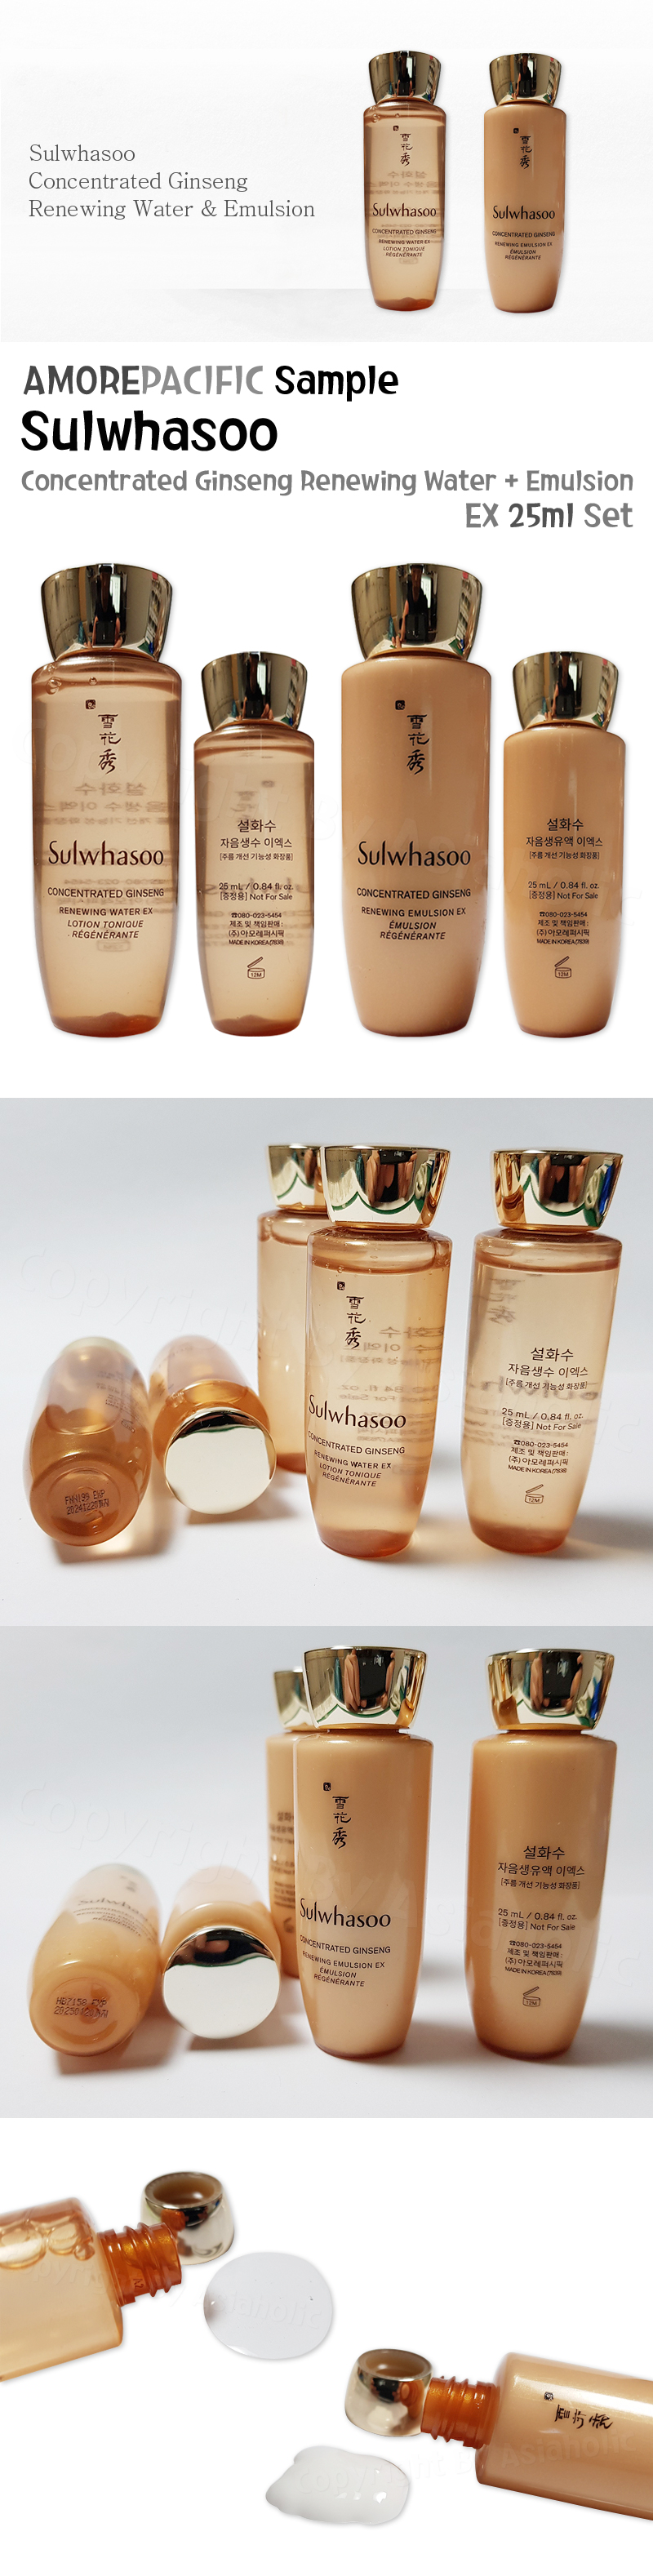 Sulwhasoo Concentrated Ginseng Renewing Water EX 25ml (3pcs) + Emulsion EX 25ml (3pcs) Sample Newest Version